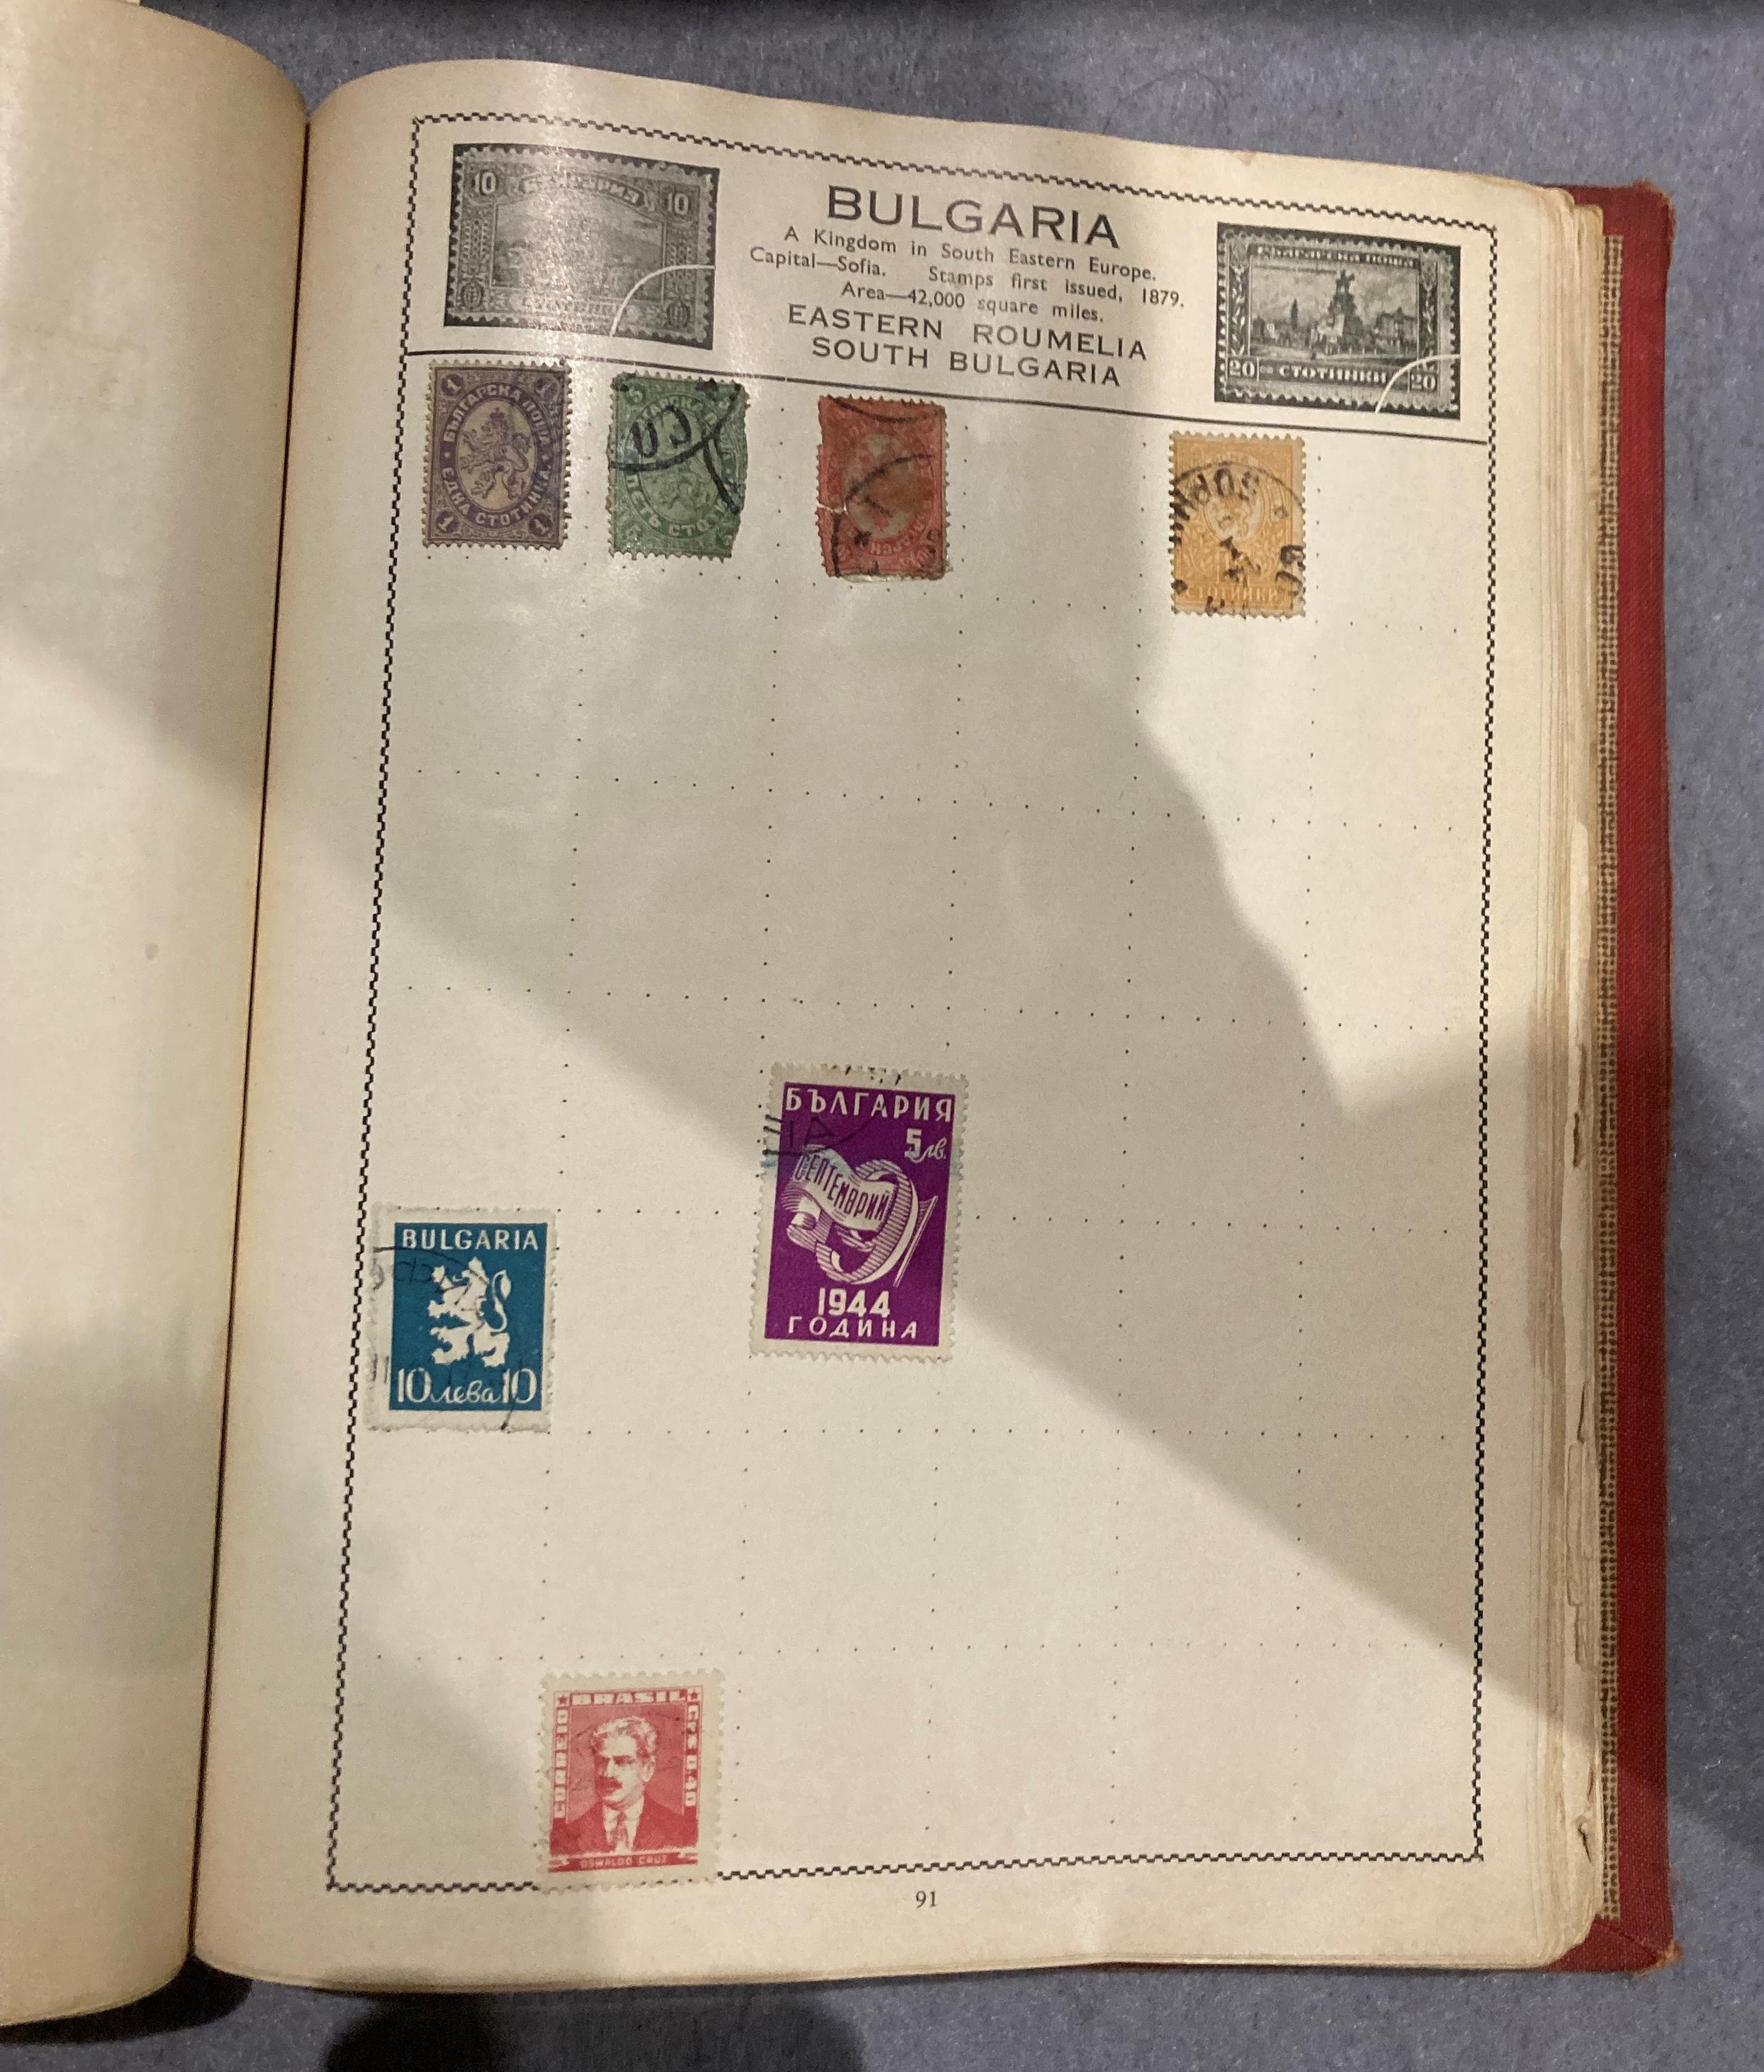 The Movaleaf illustrated stamp album and contents - assorted world stamps and contents to tray - - Image 7 of 7